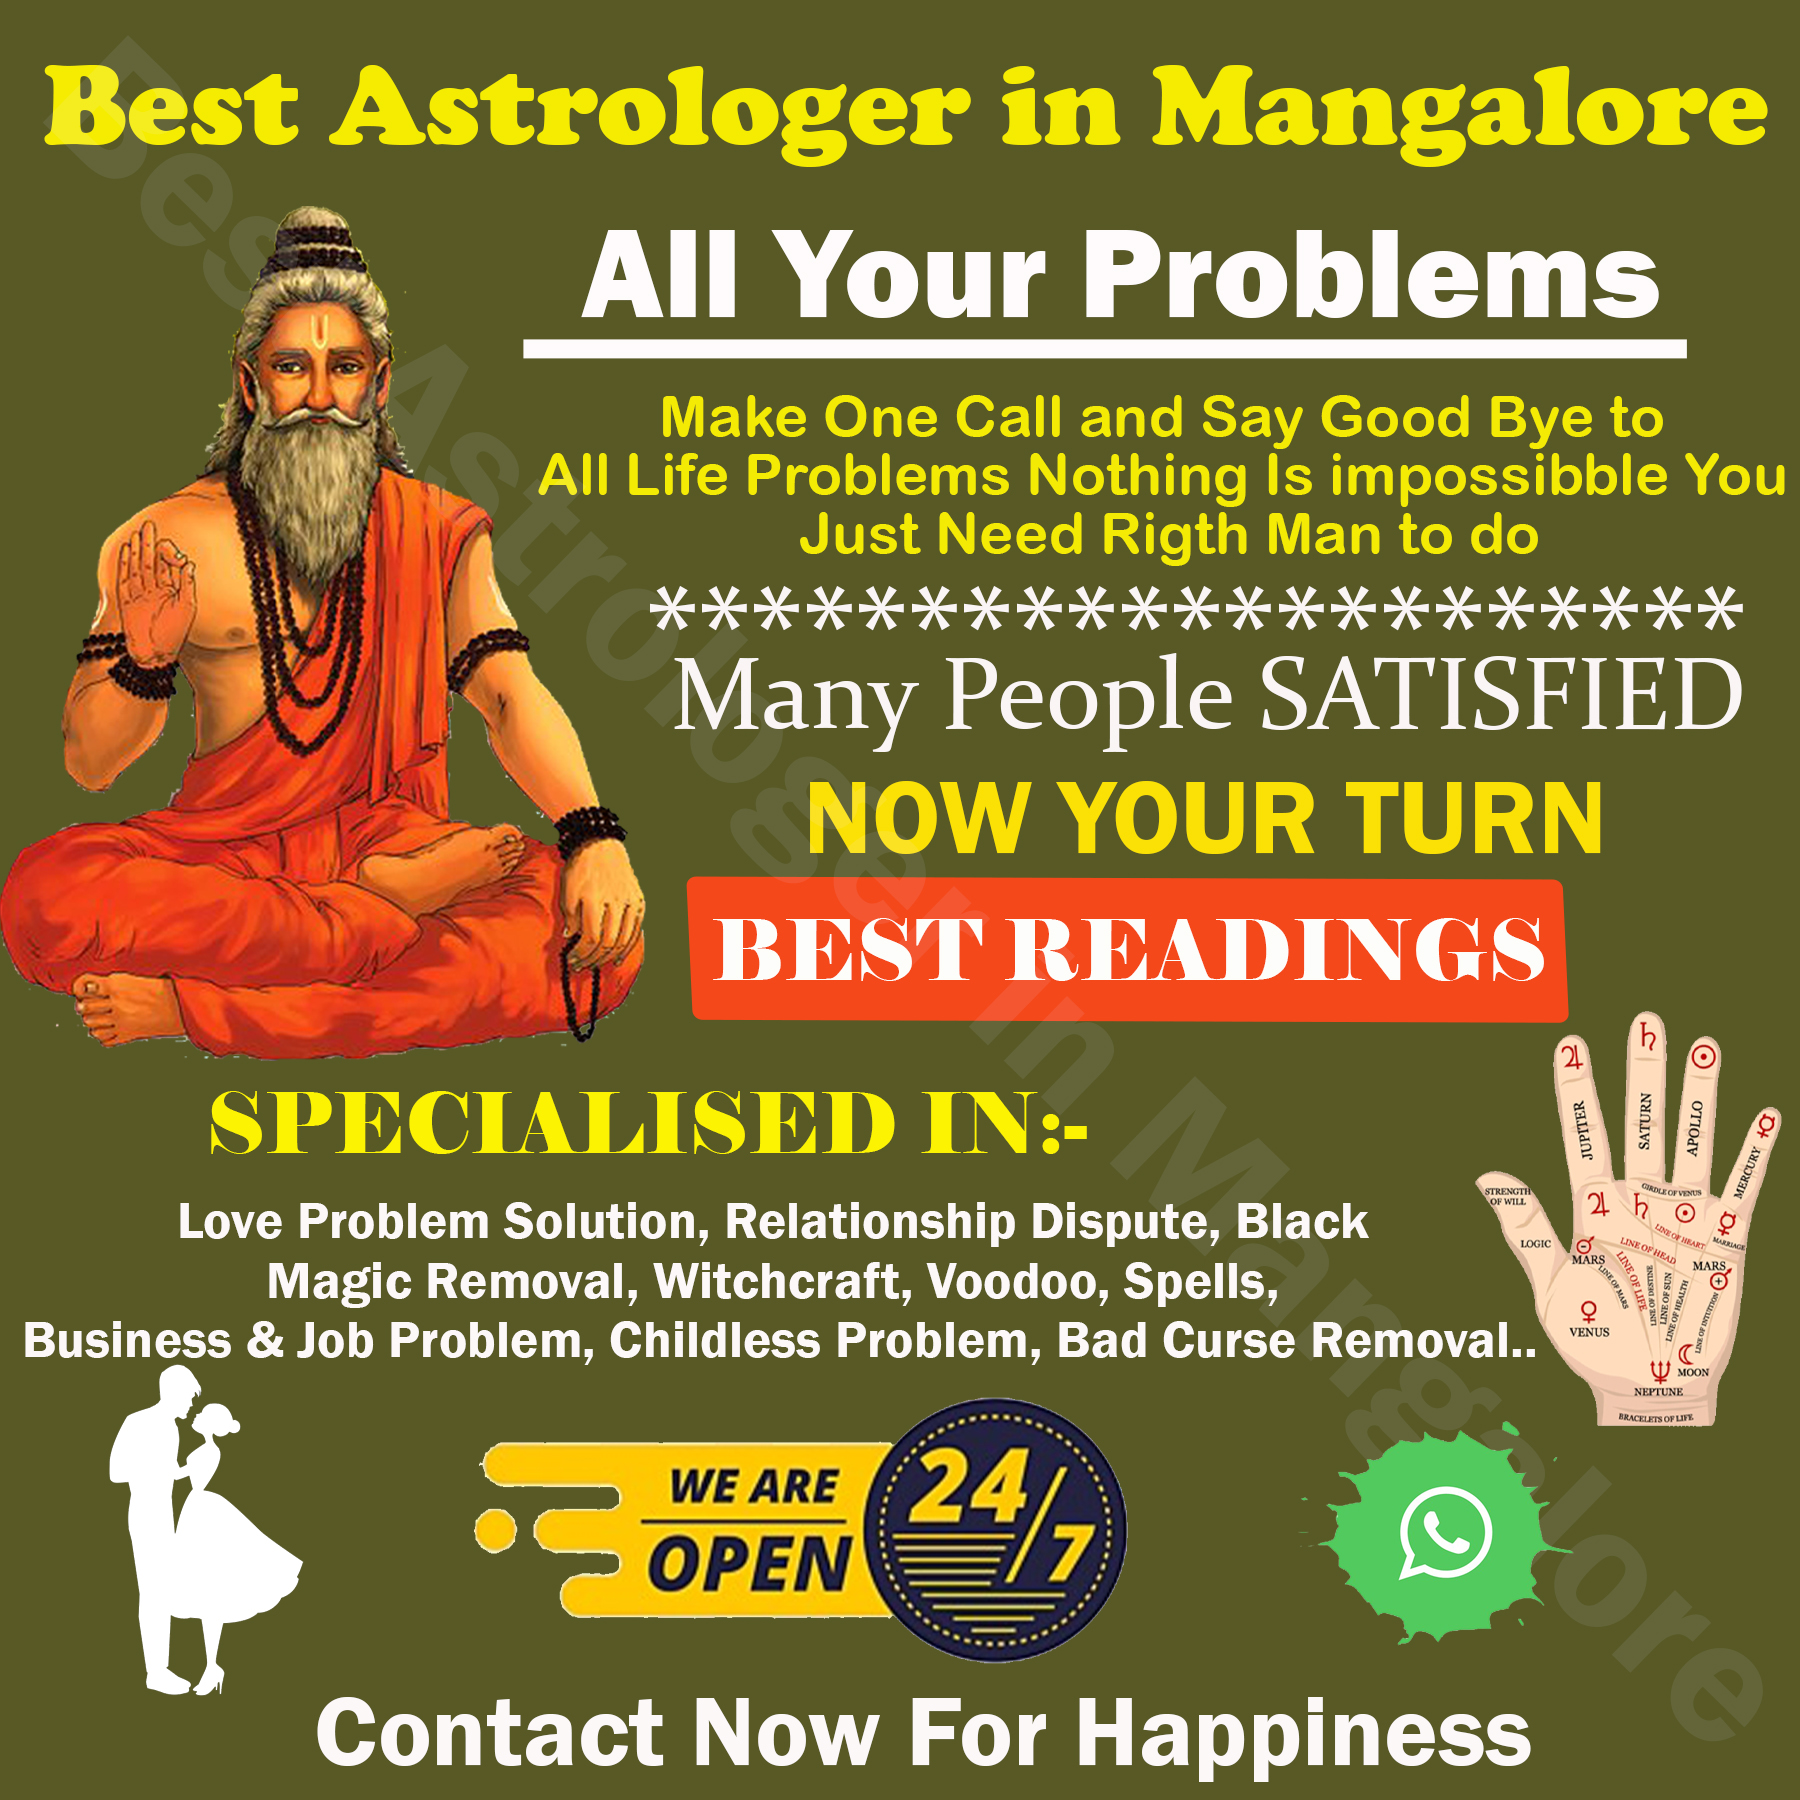 Best Astrologer in Mangalore | Famous Astrologer in Mangalore